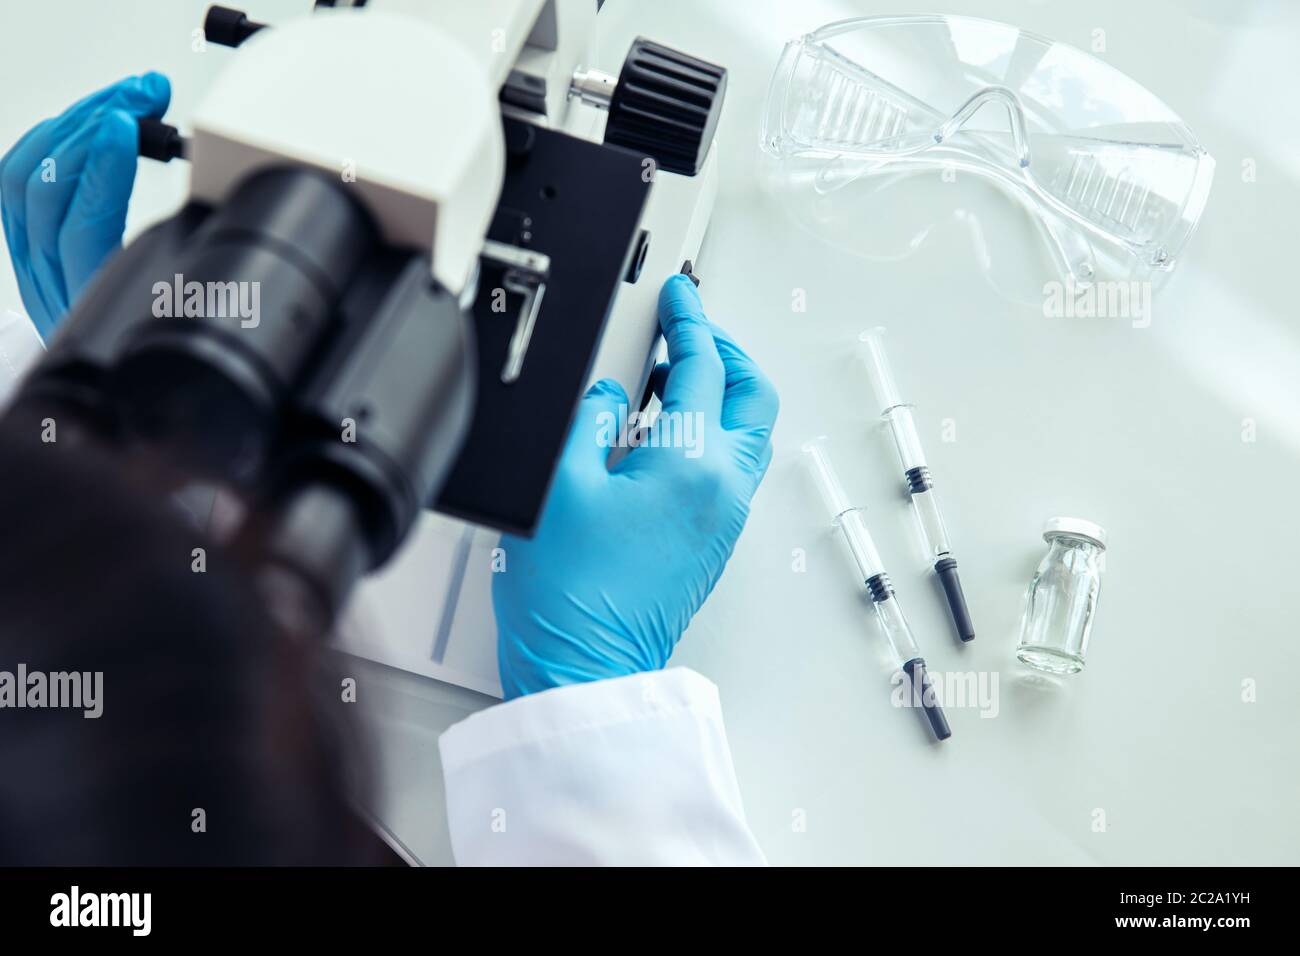 Female scientist uses microscope. Female scientist in protective gloves uses medical microscope with syringes, protective glasses and phial next to it Stock Photo